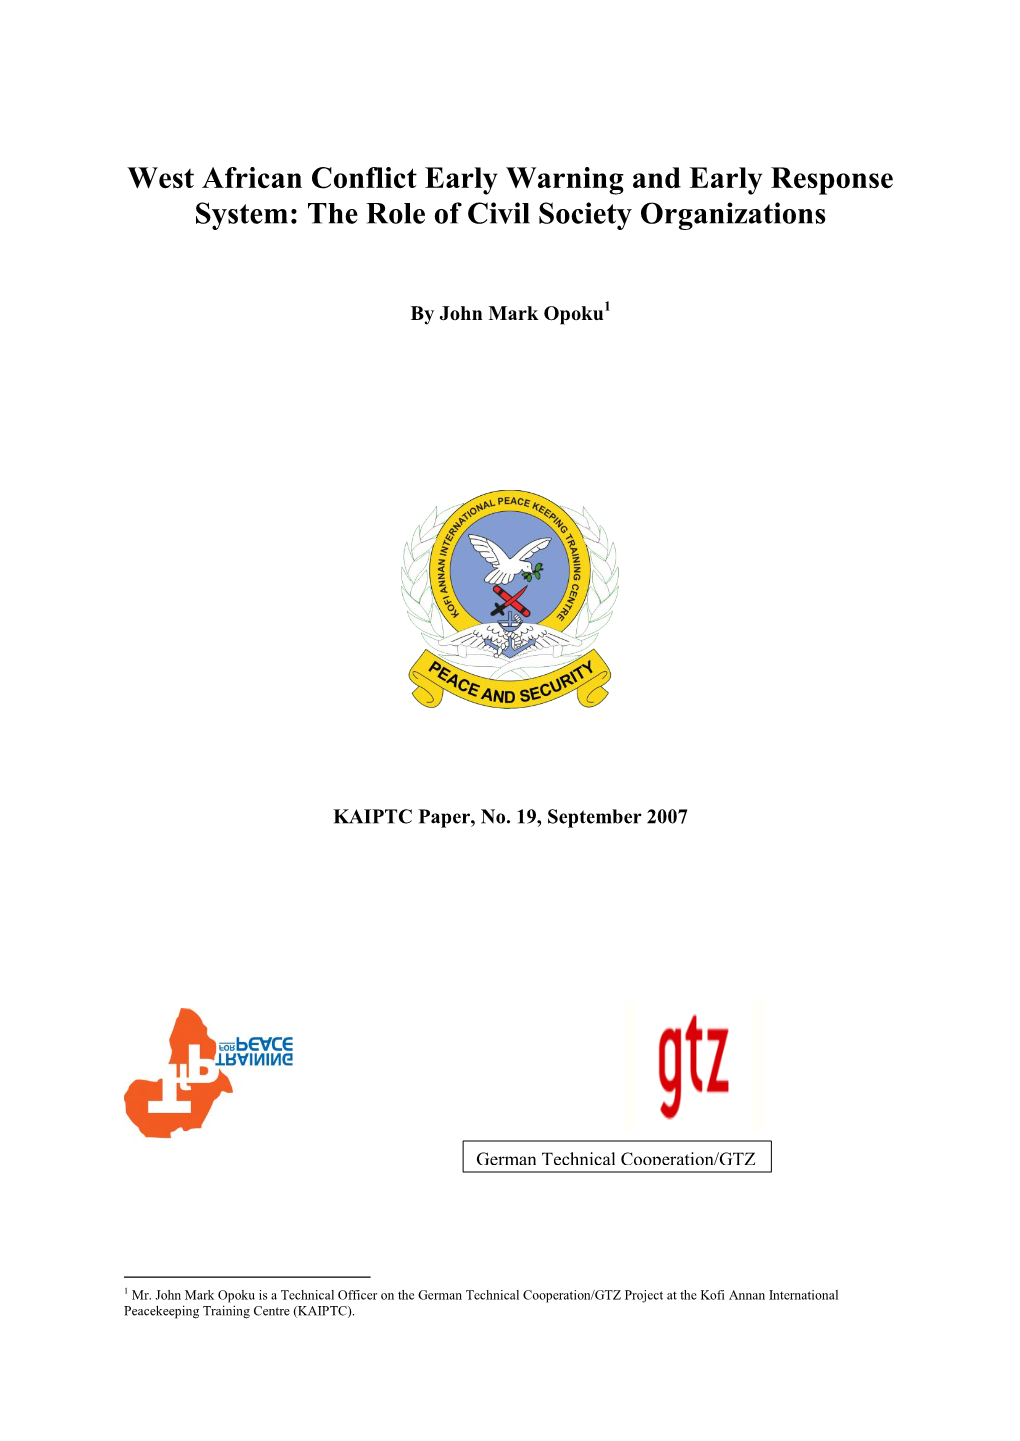 West African Conflict Early Warning and Early Response System: the Role of Civil Society Organizations